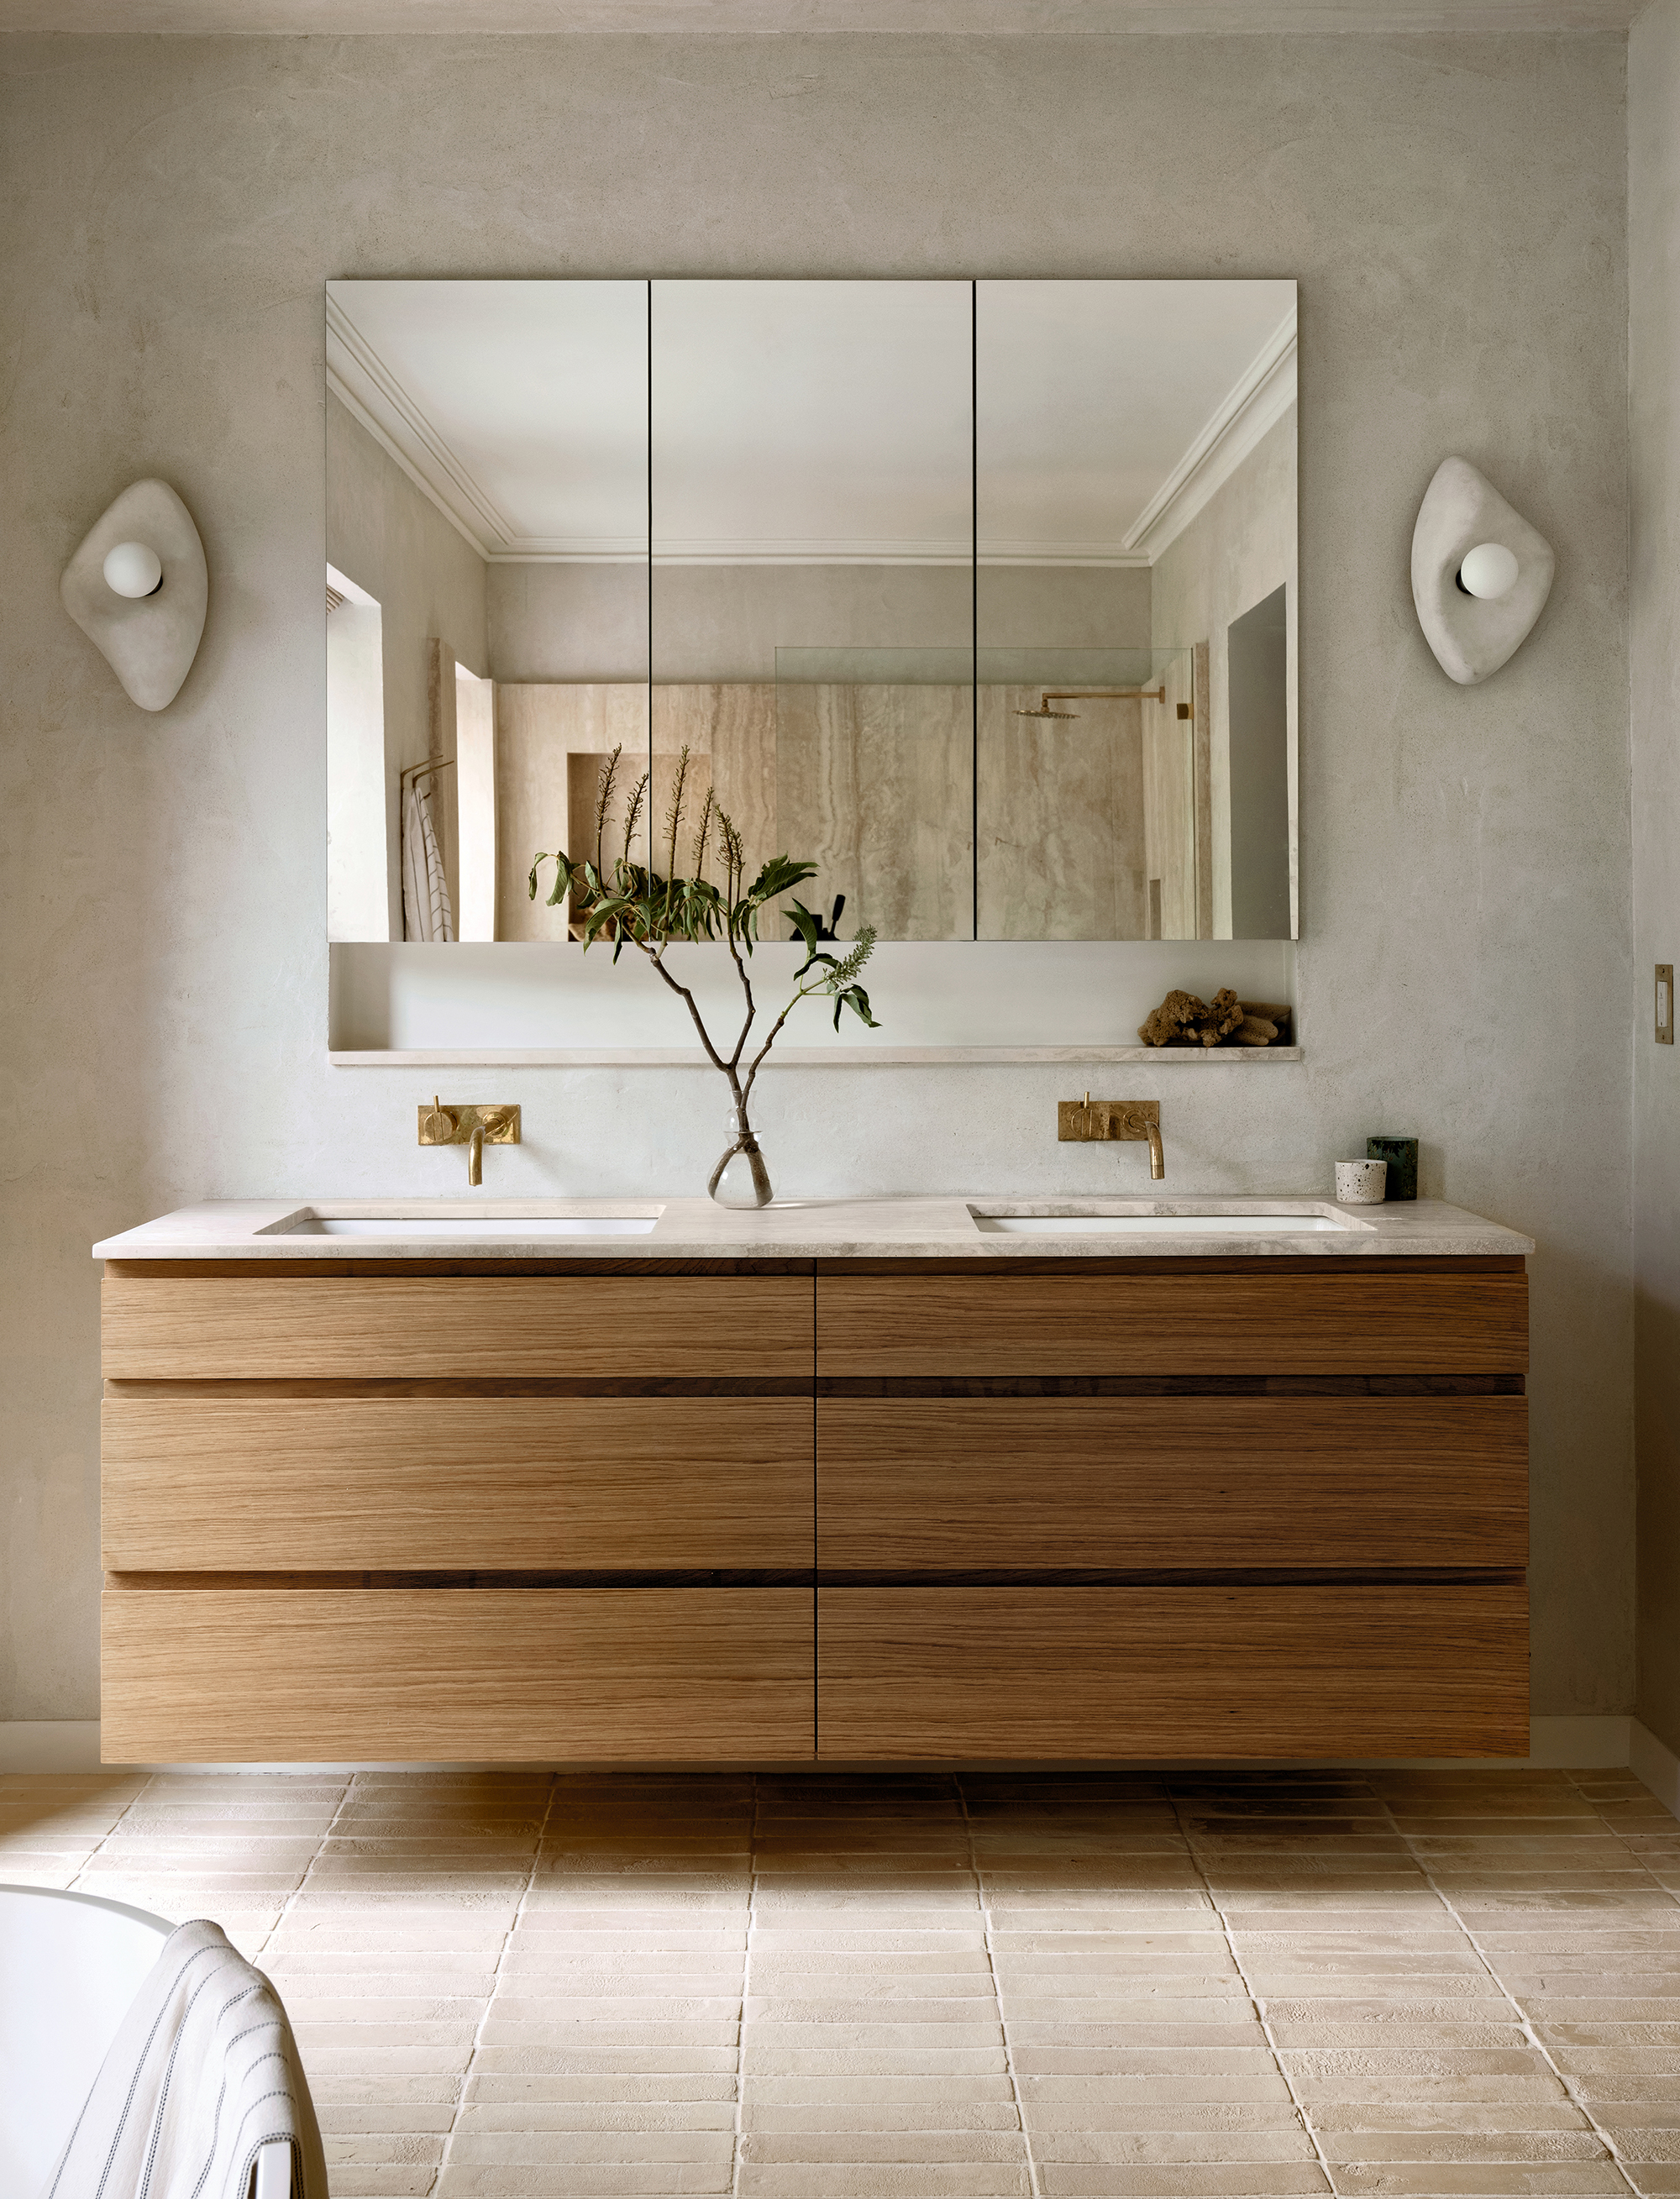 the custom wall mounted vanity is rift cut white oak with a navona travertine c 34